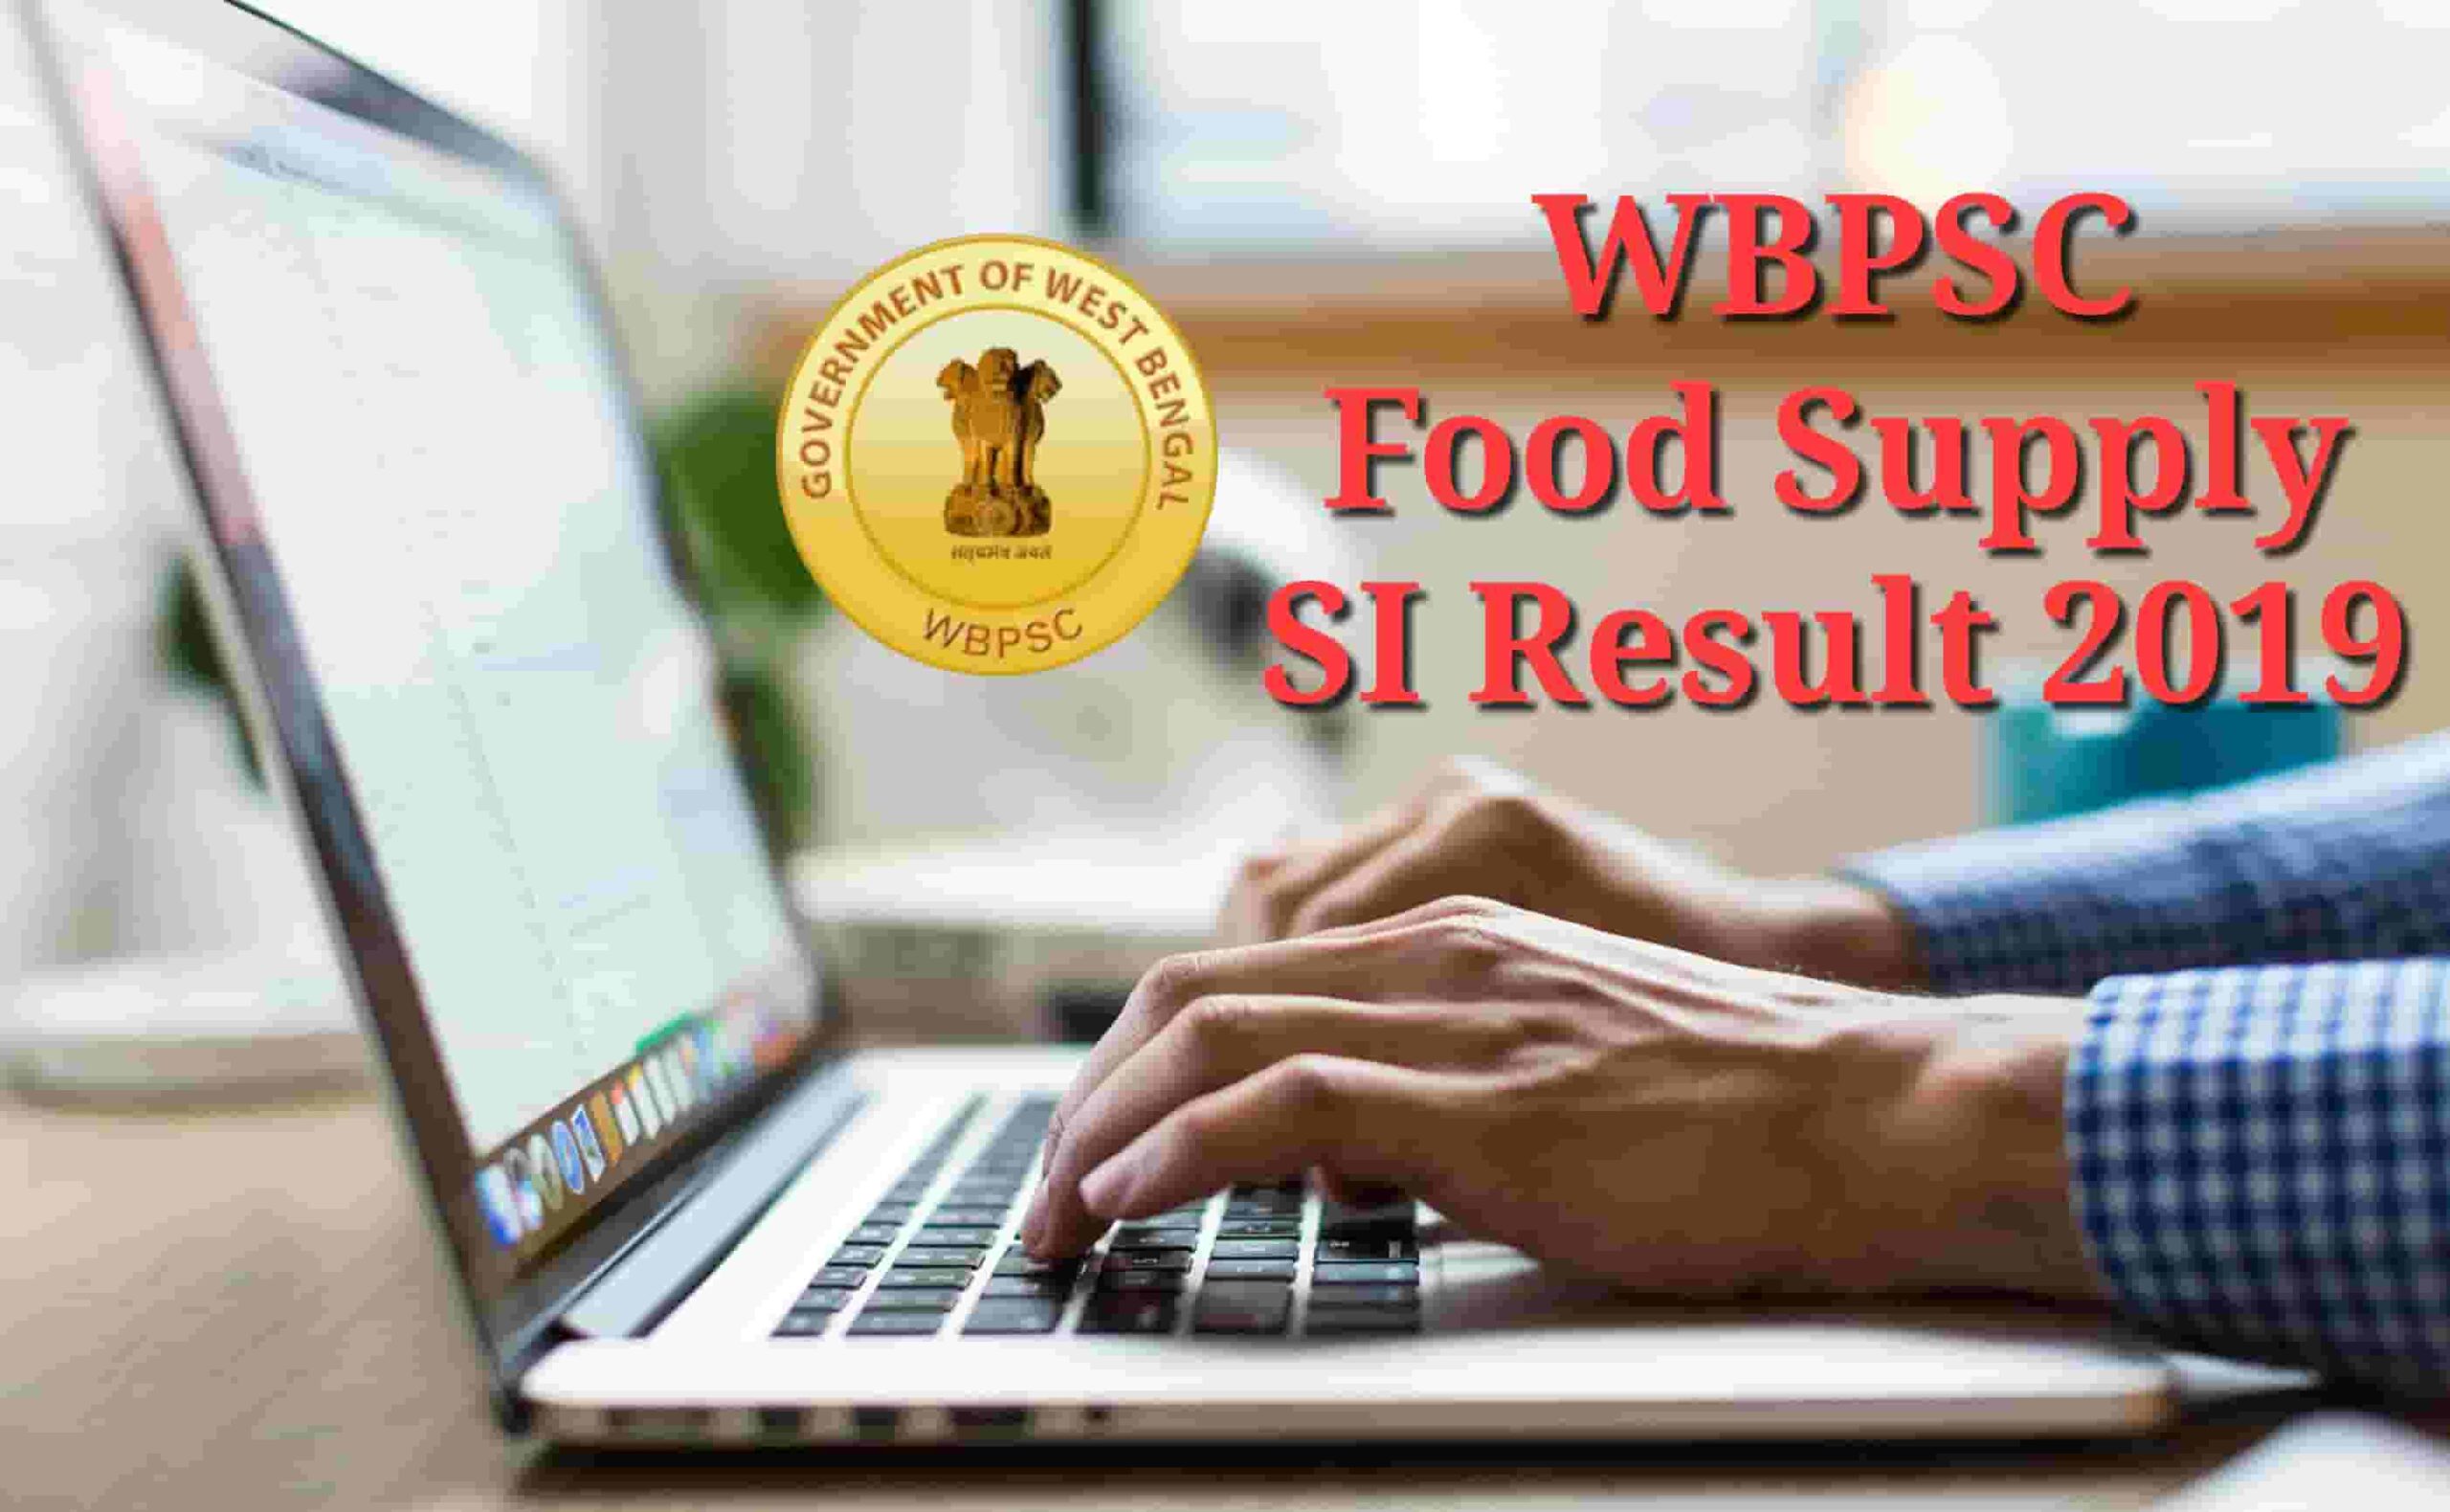 WBPSC Food Supply SI Result 2019